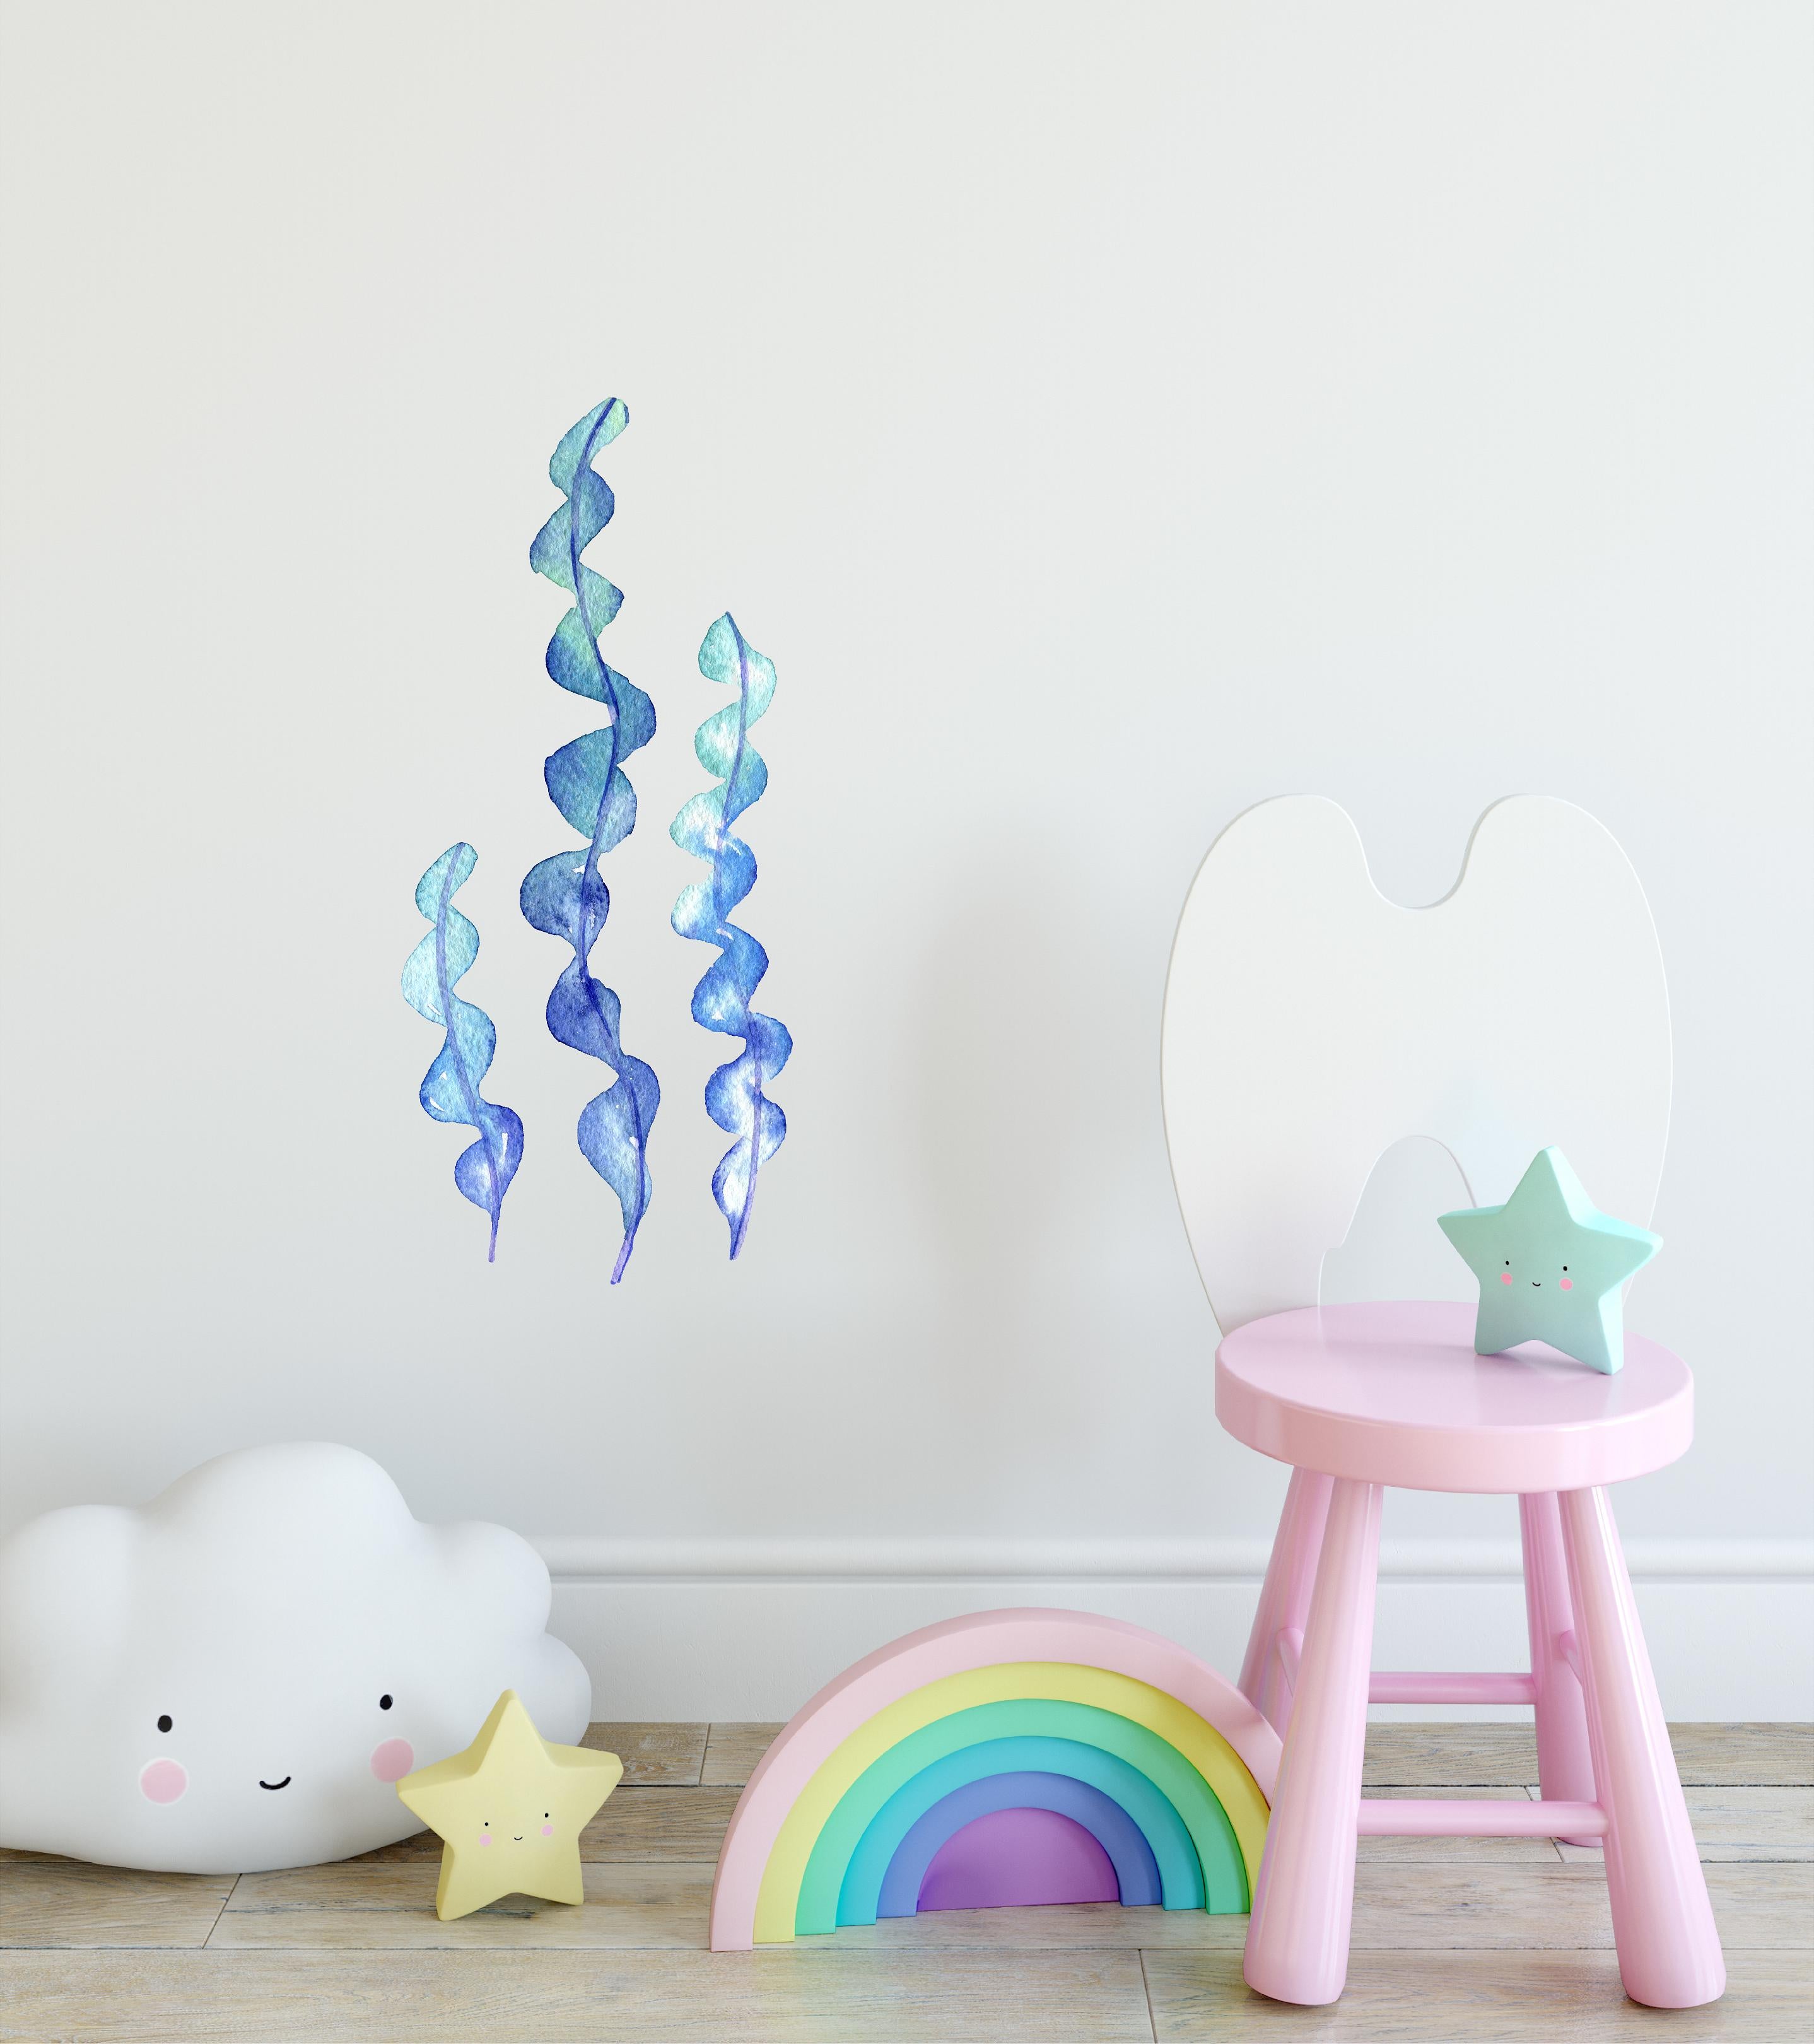 Blue Seaweed Wall Decal Set of 3 Removable Fabric Vinyl Wall Sticker | DecalBaby